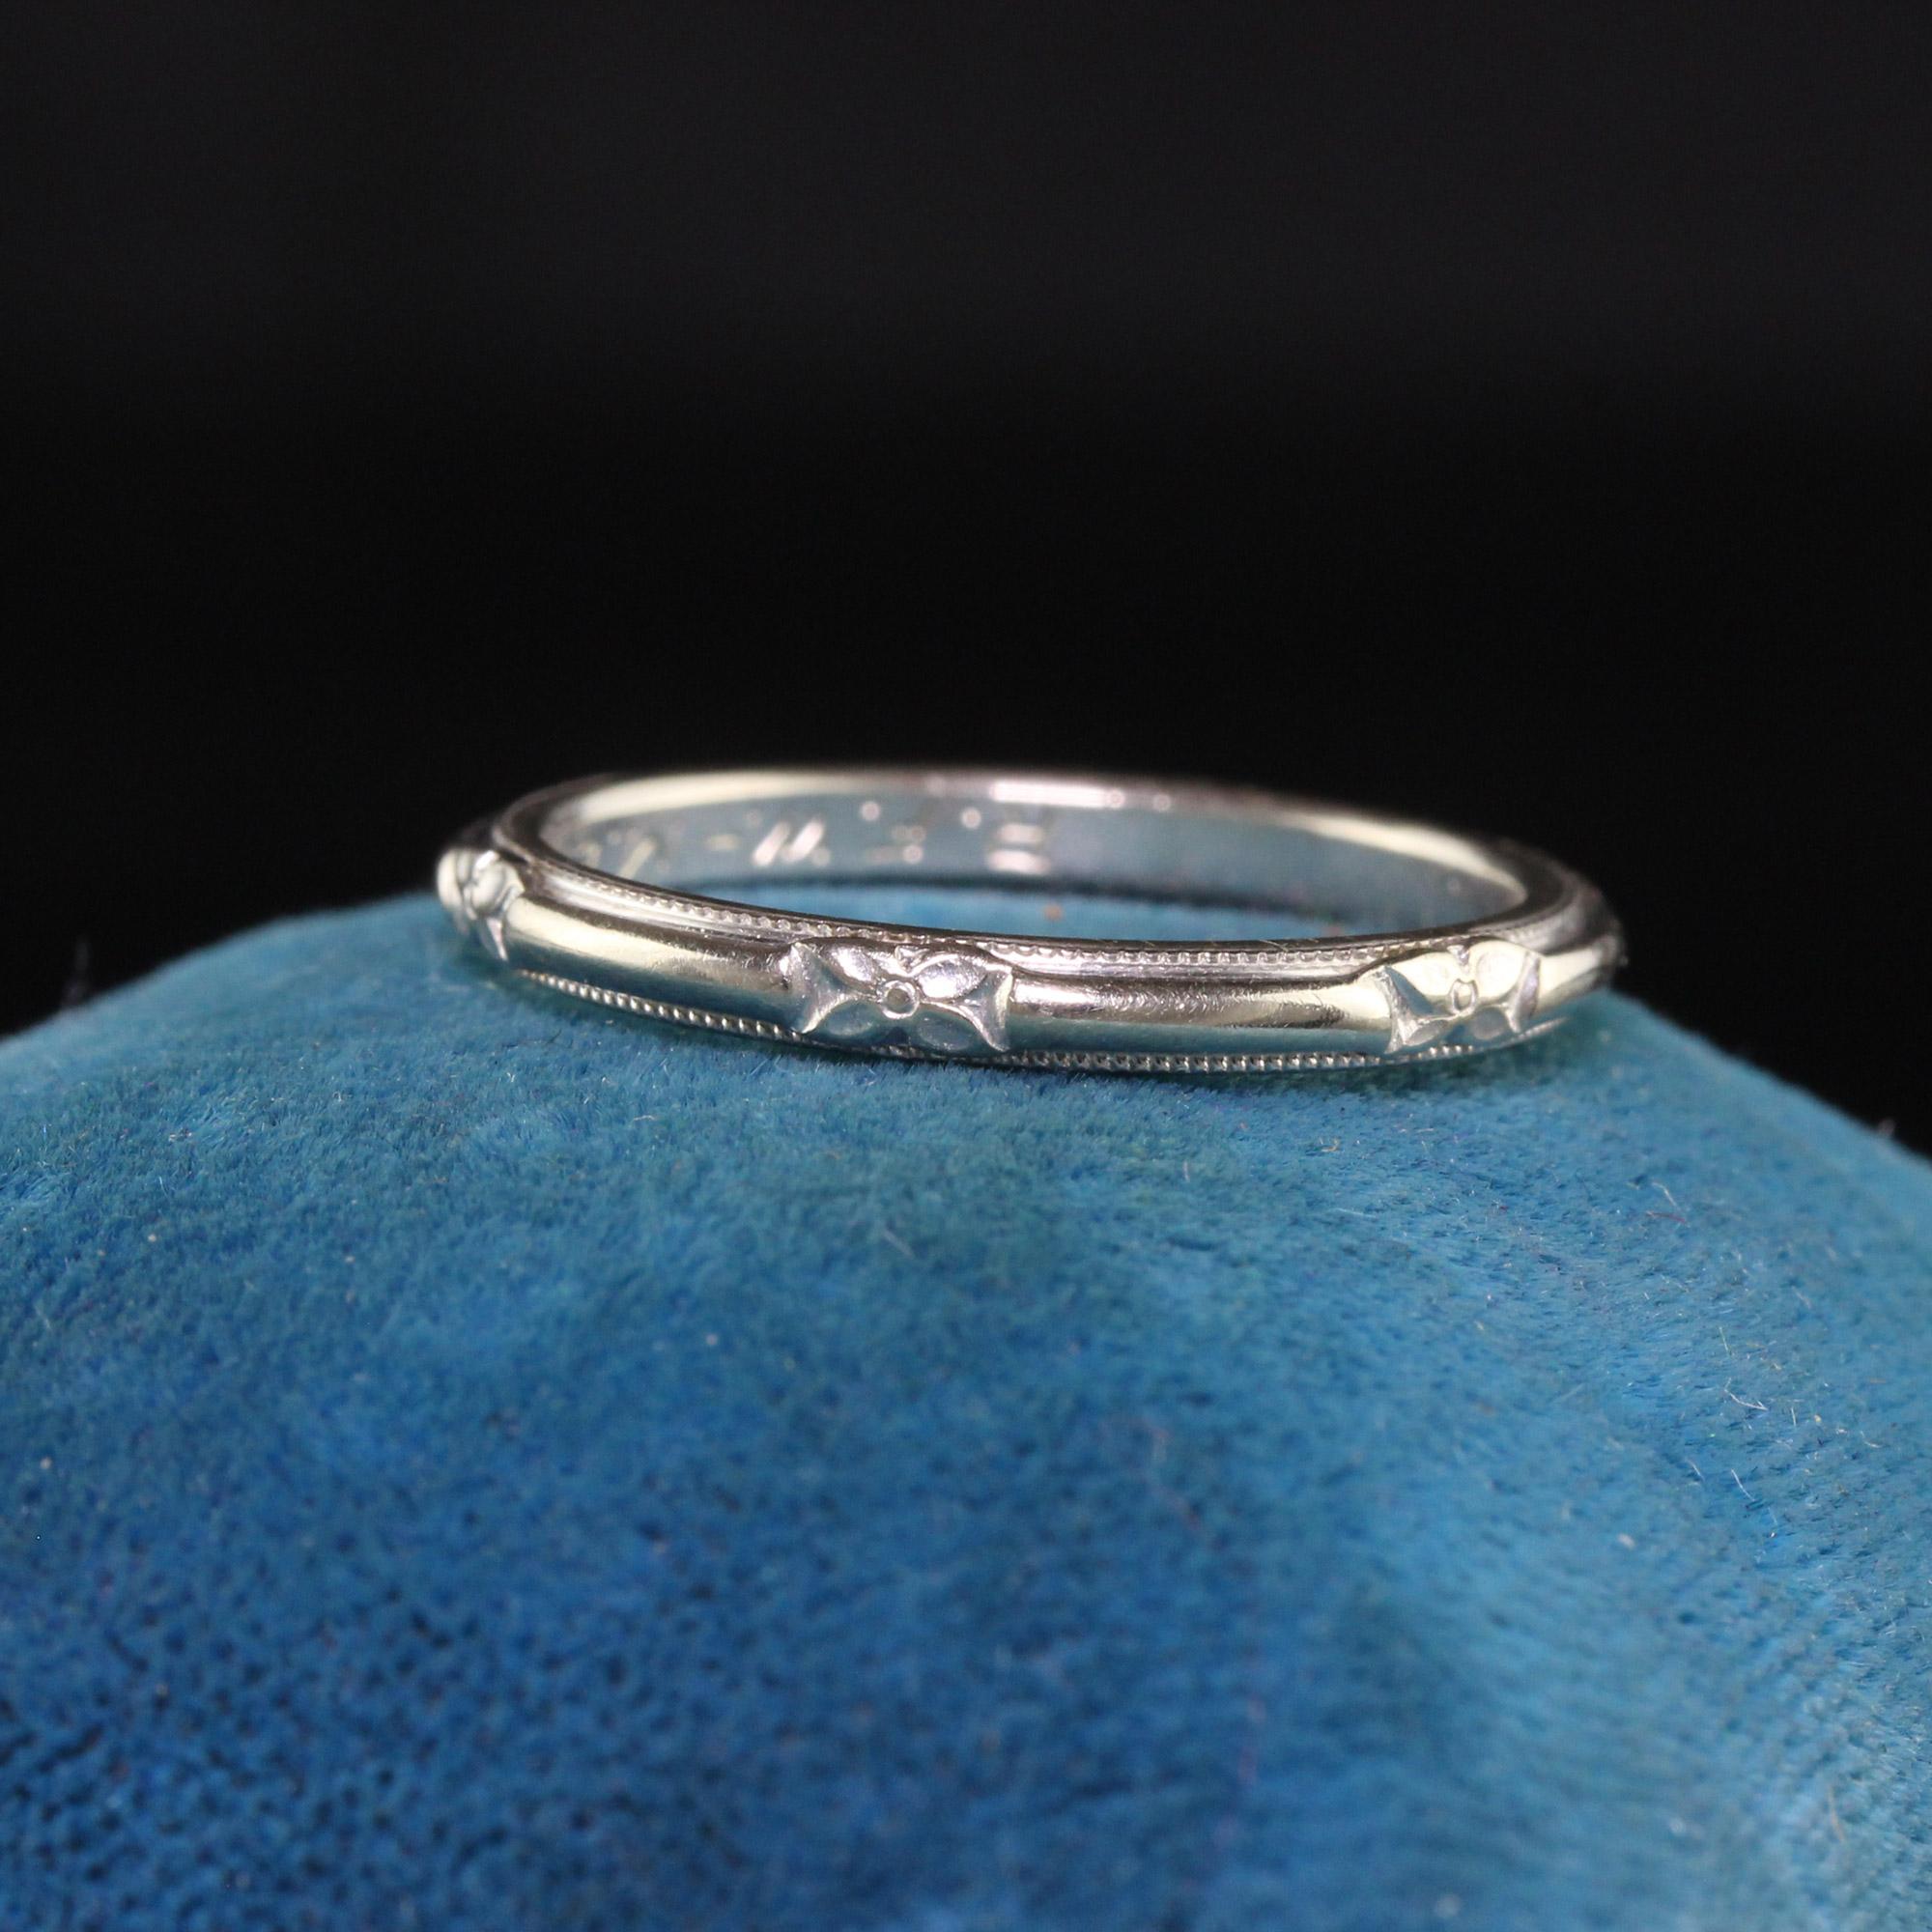 Beautiful Antique Art Deco 14K White Gold Art Carved Engraved Wedding Band. This gorgeous wedding band is crafted in 14k white gold. There are engravings going around the entire ring and it is in great condition. The inside of the band is engraved